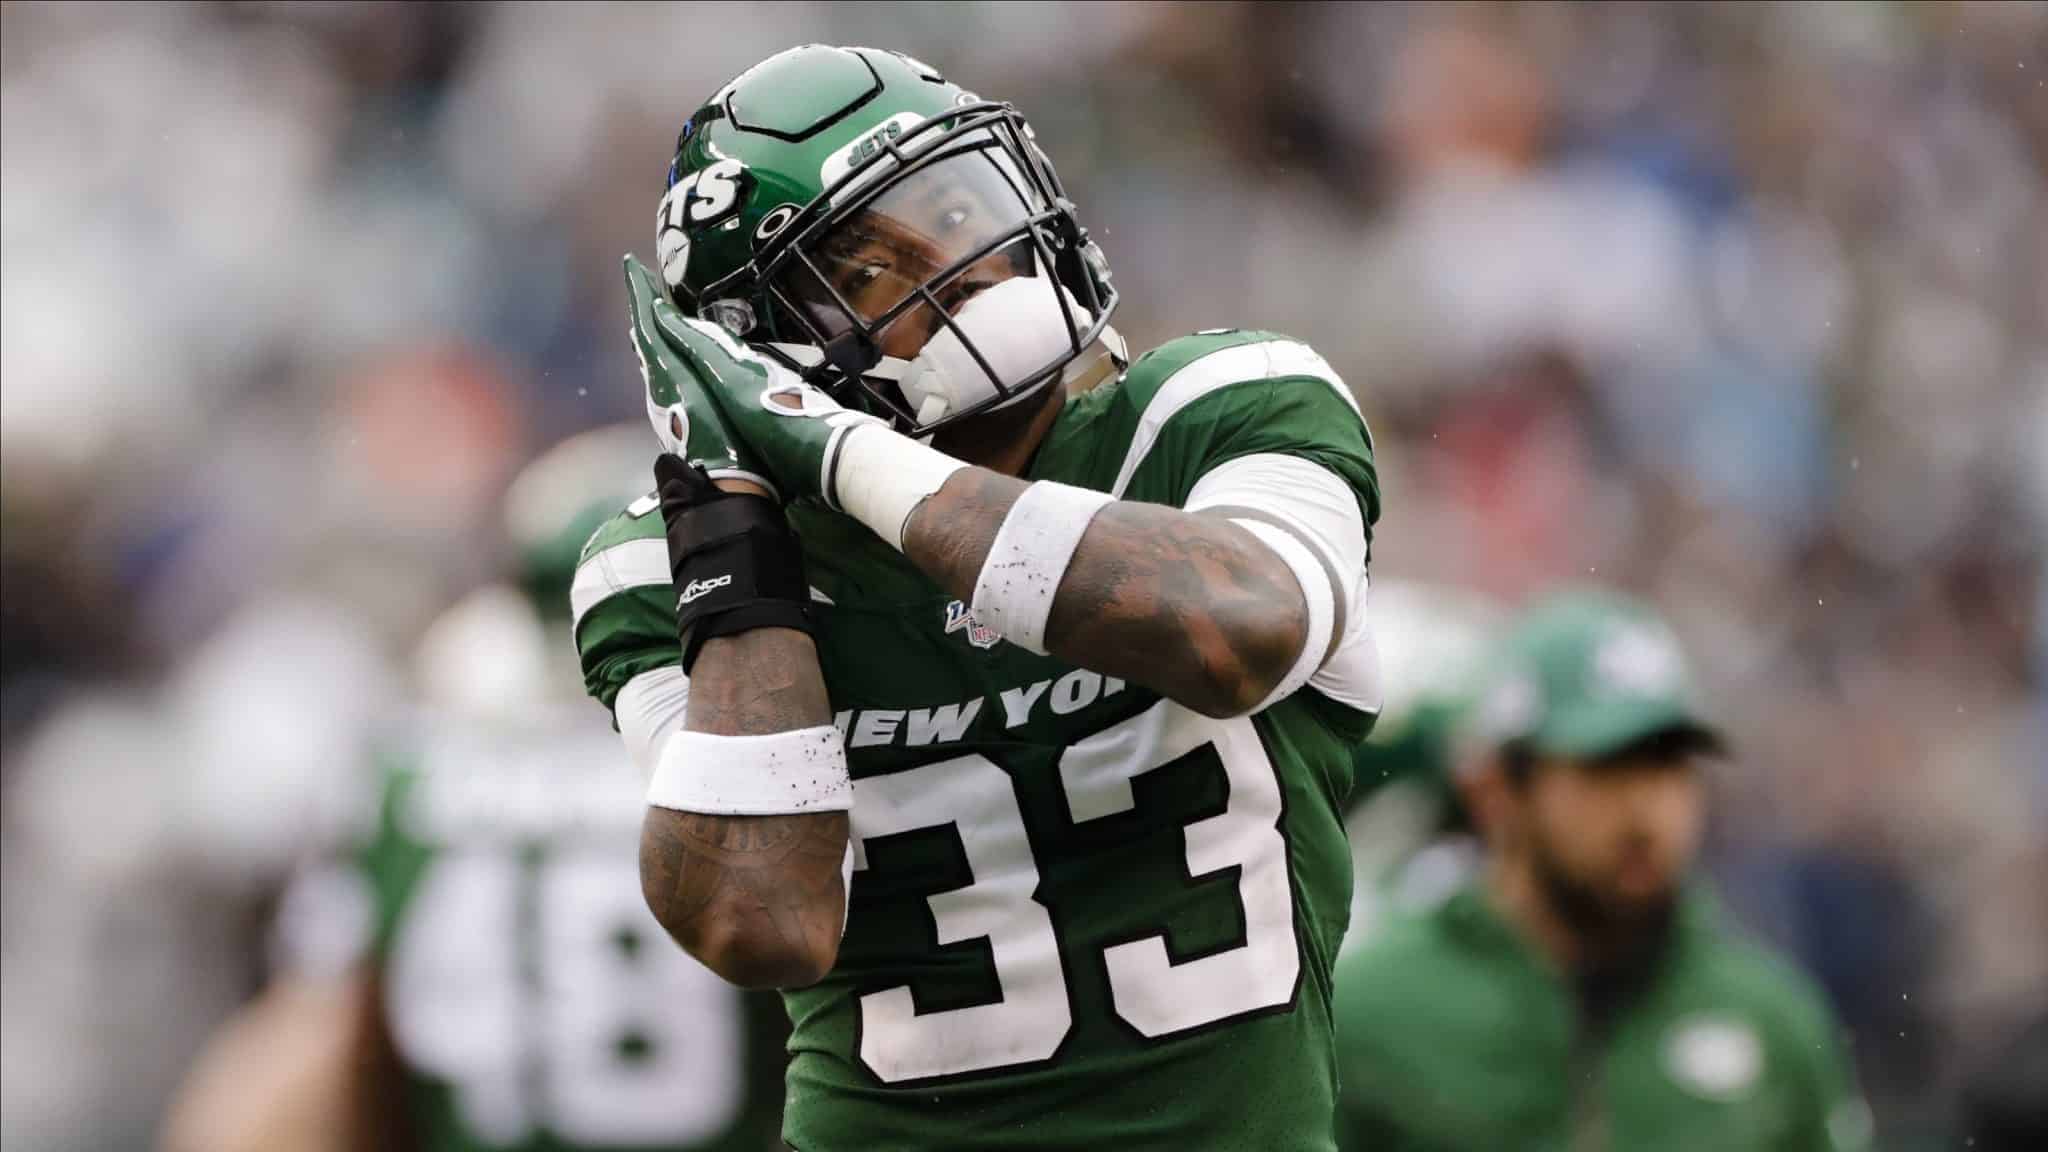 New York Jets strong safety Jamal Adams (33) reacts during the first half of an NFL football game against the Oakland Raiders, Sunday, Nov. 24, 2019, in East Rutherford, N.J.